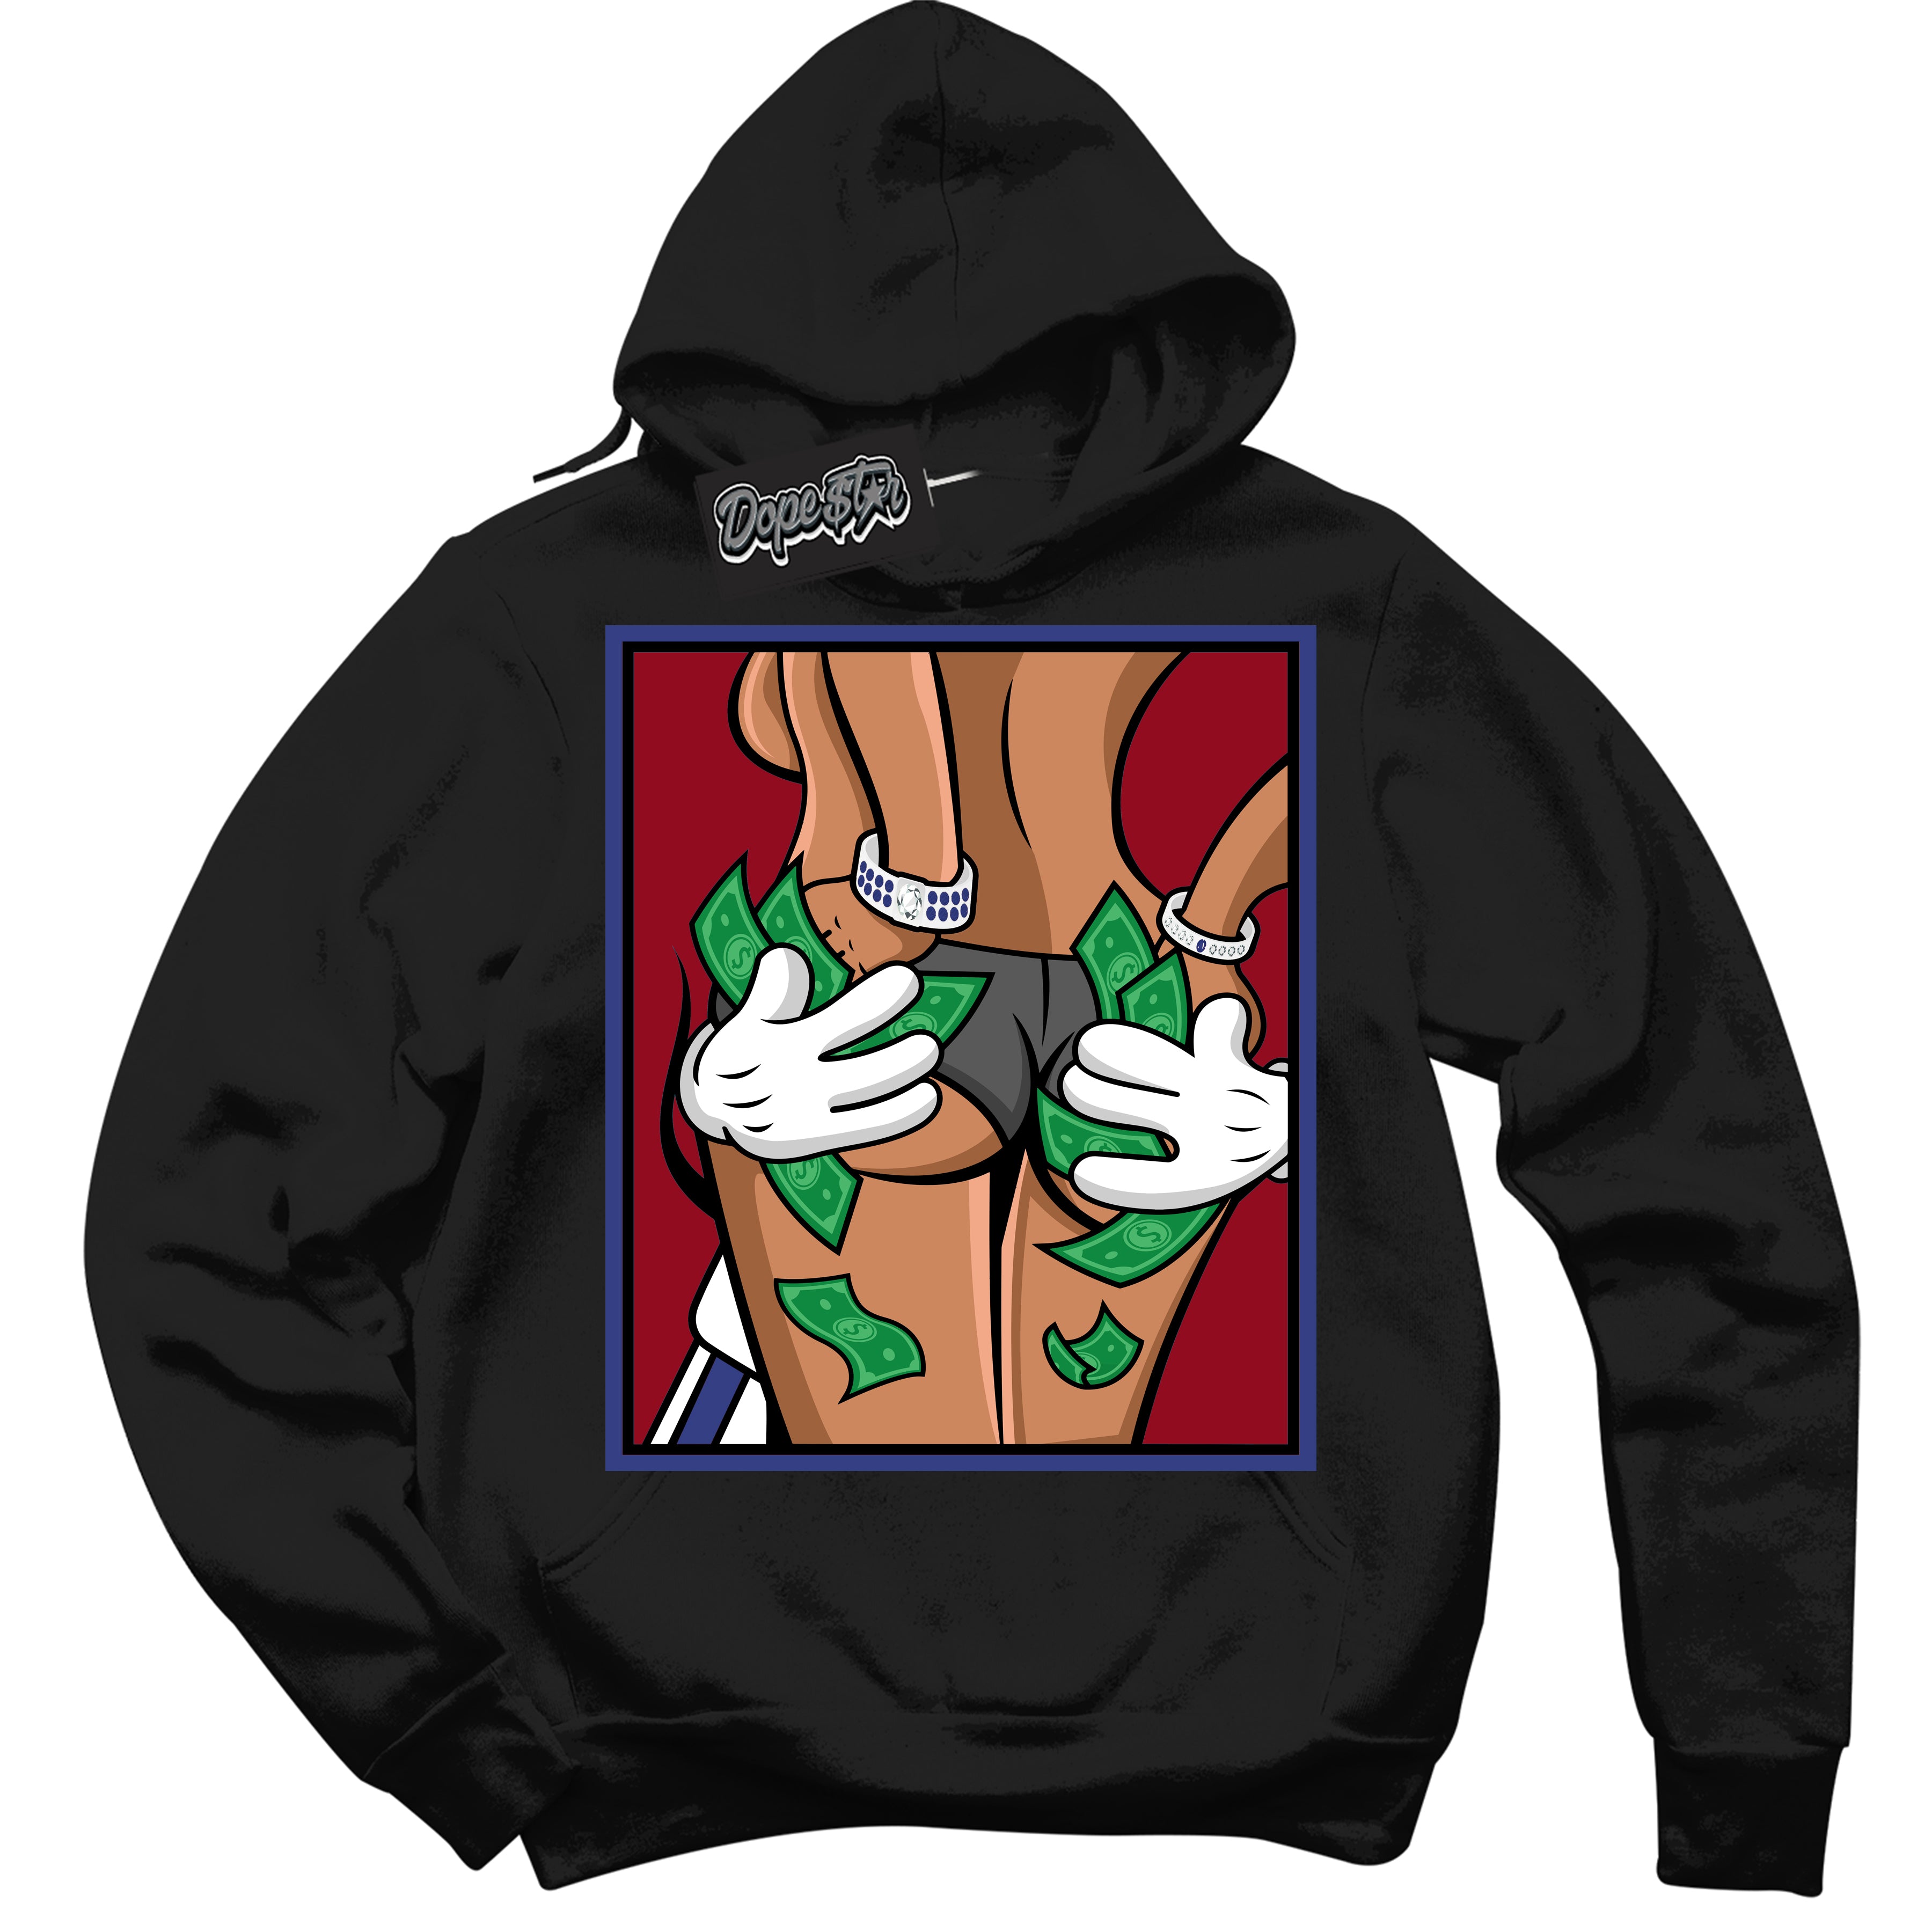 Cool Black Hoodie with “ Money Hands ”  design that Perfectly Matches Playoffs 8s Sneakers.